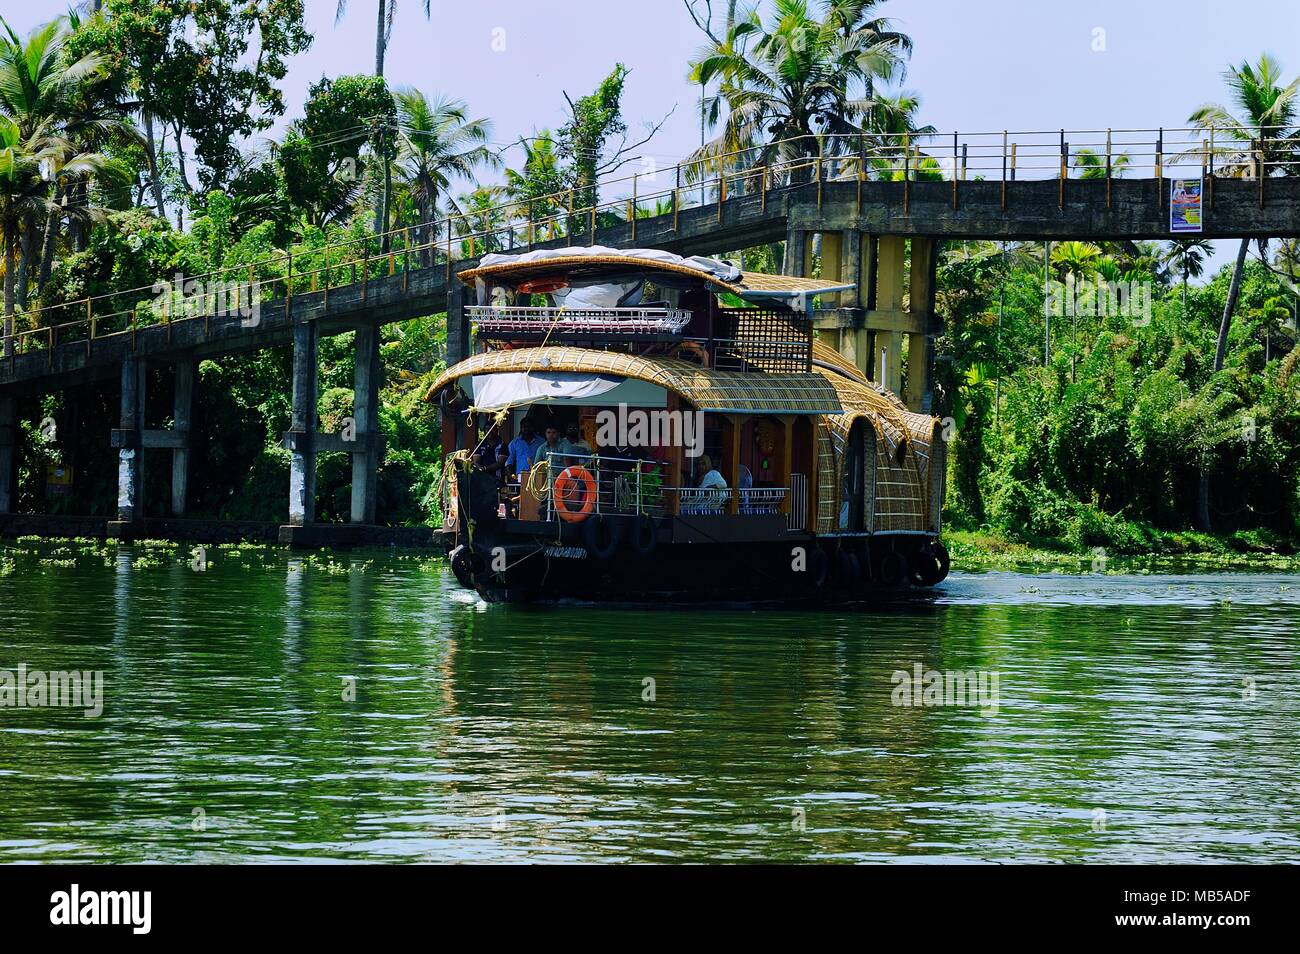 Cochin, India - January 2017:Tourists on a river boat on the backwaters of Kochin Stock Photo